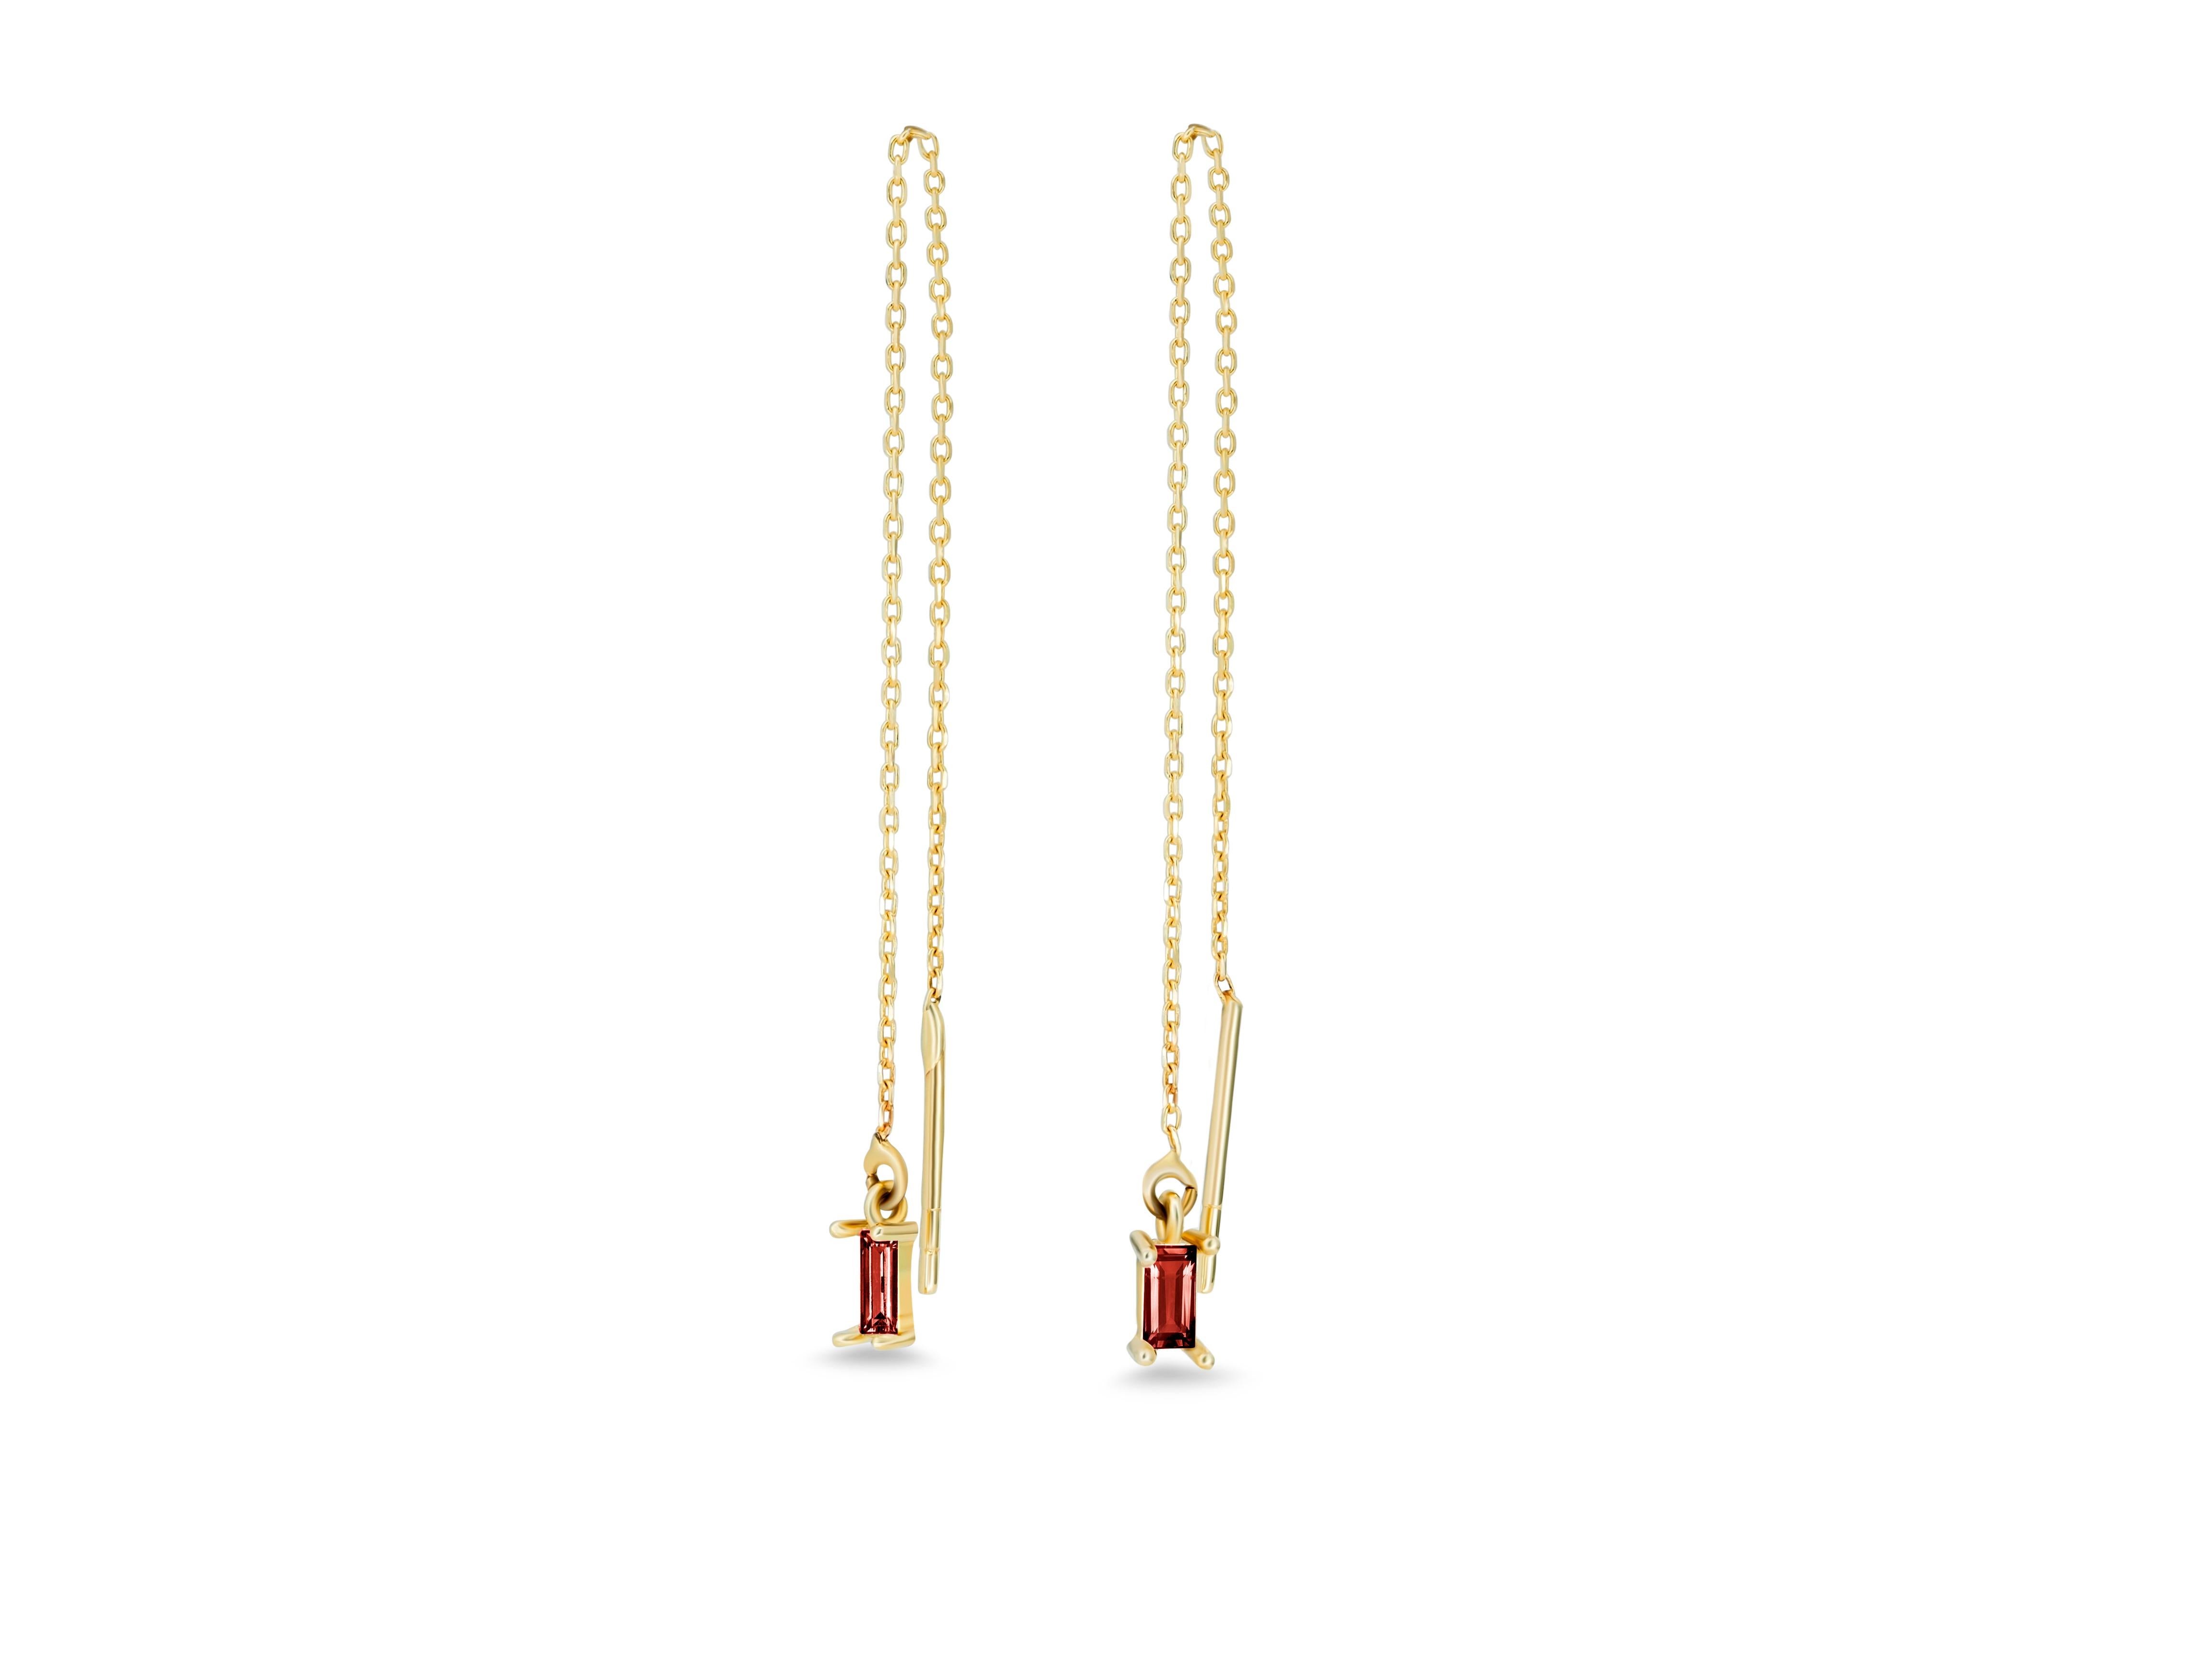 14k solid gold drop earrings with garnets. 
Natural garnet solid gold earrings. Chain earrings.Baguette Earrings Dangle.

Metal: 14 karat gold
Weight: 0.8-0.9 g.
Size: 6.5-6.8 sm.

Central stones: Natural garnets 2 pieces
Cut: baguette
Weight: